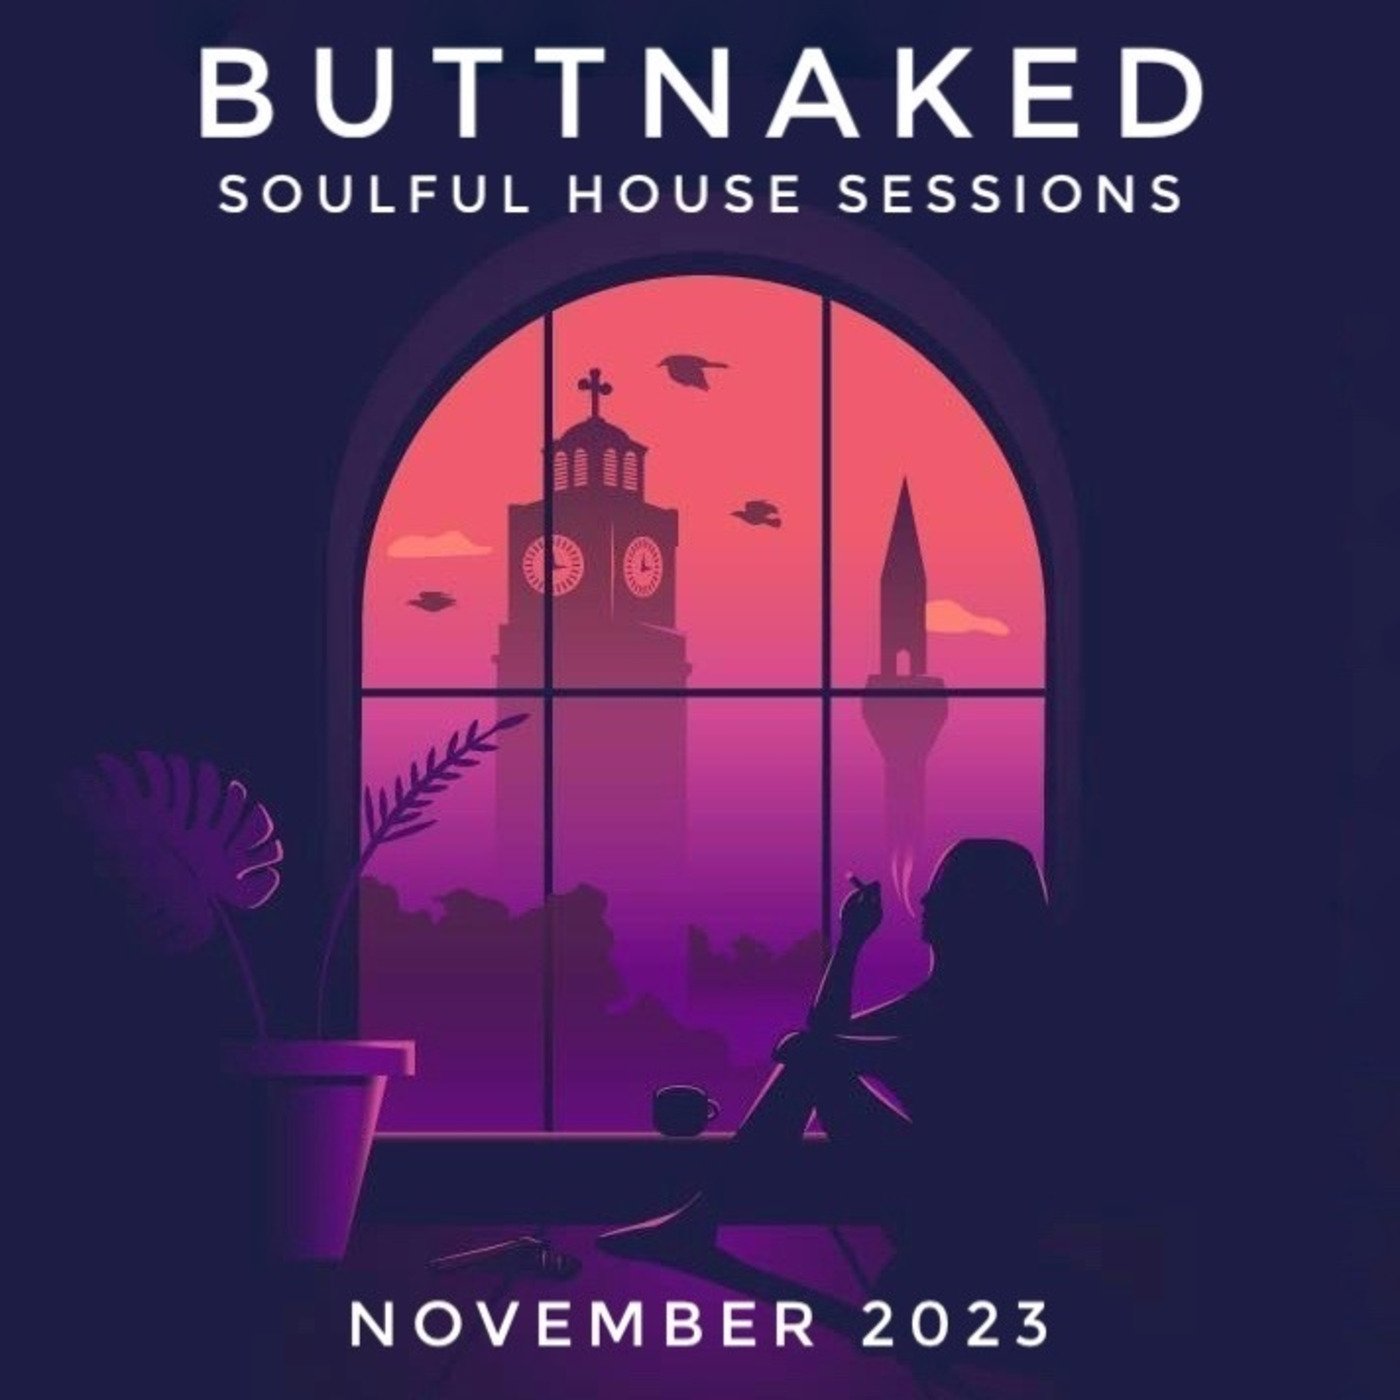 November 2023 - Iain Willis presents The Buttnaked Soulful House Sessions